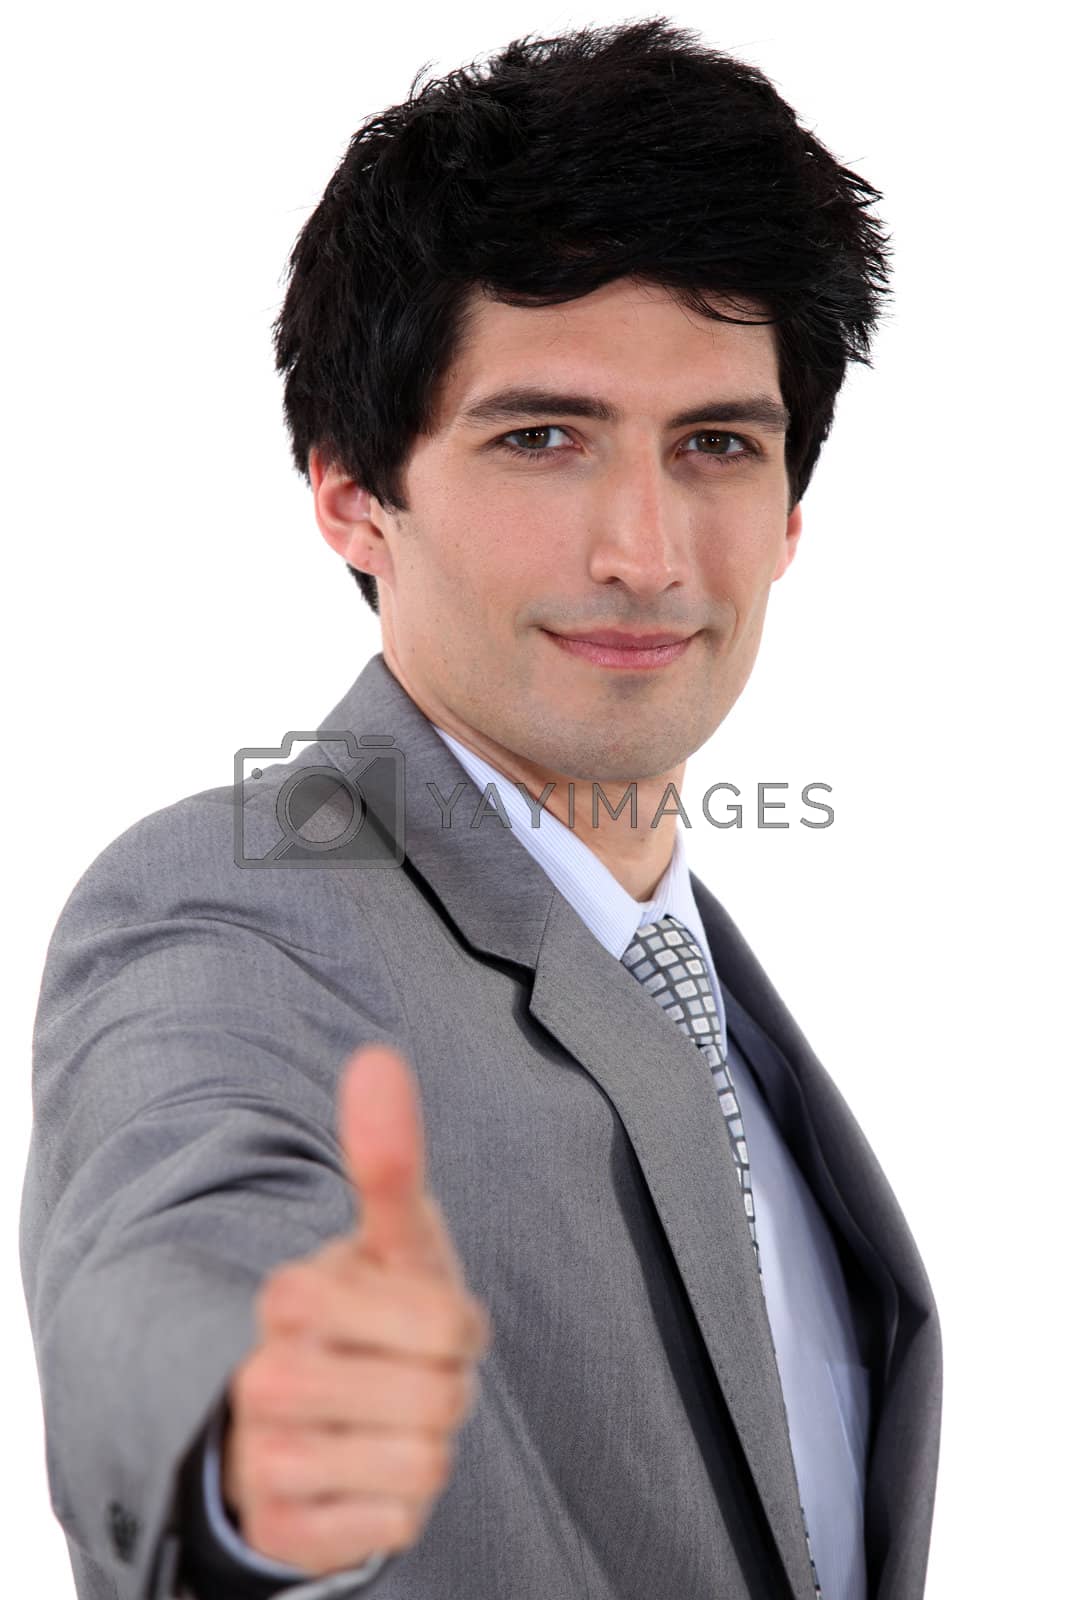 Royalty free image of Satisfied man by phovoir